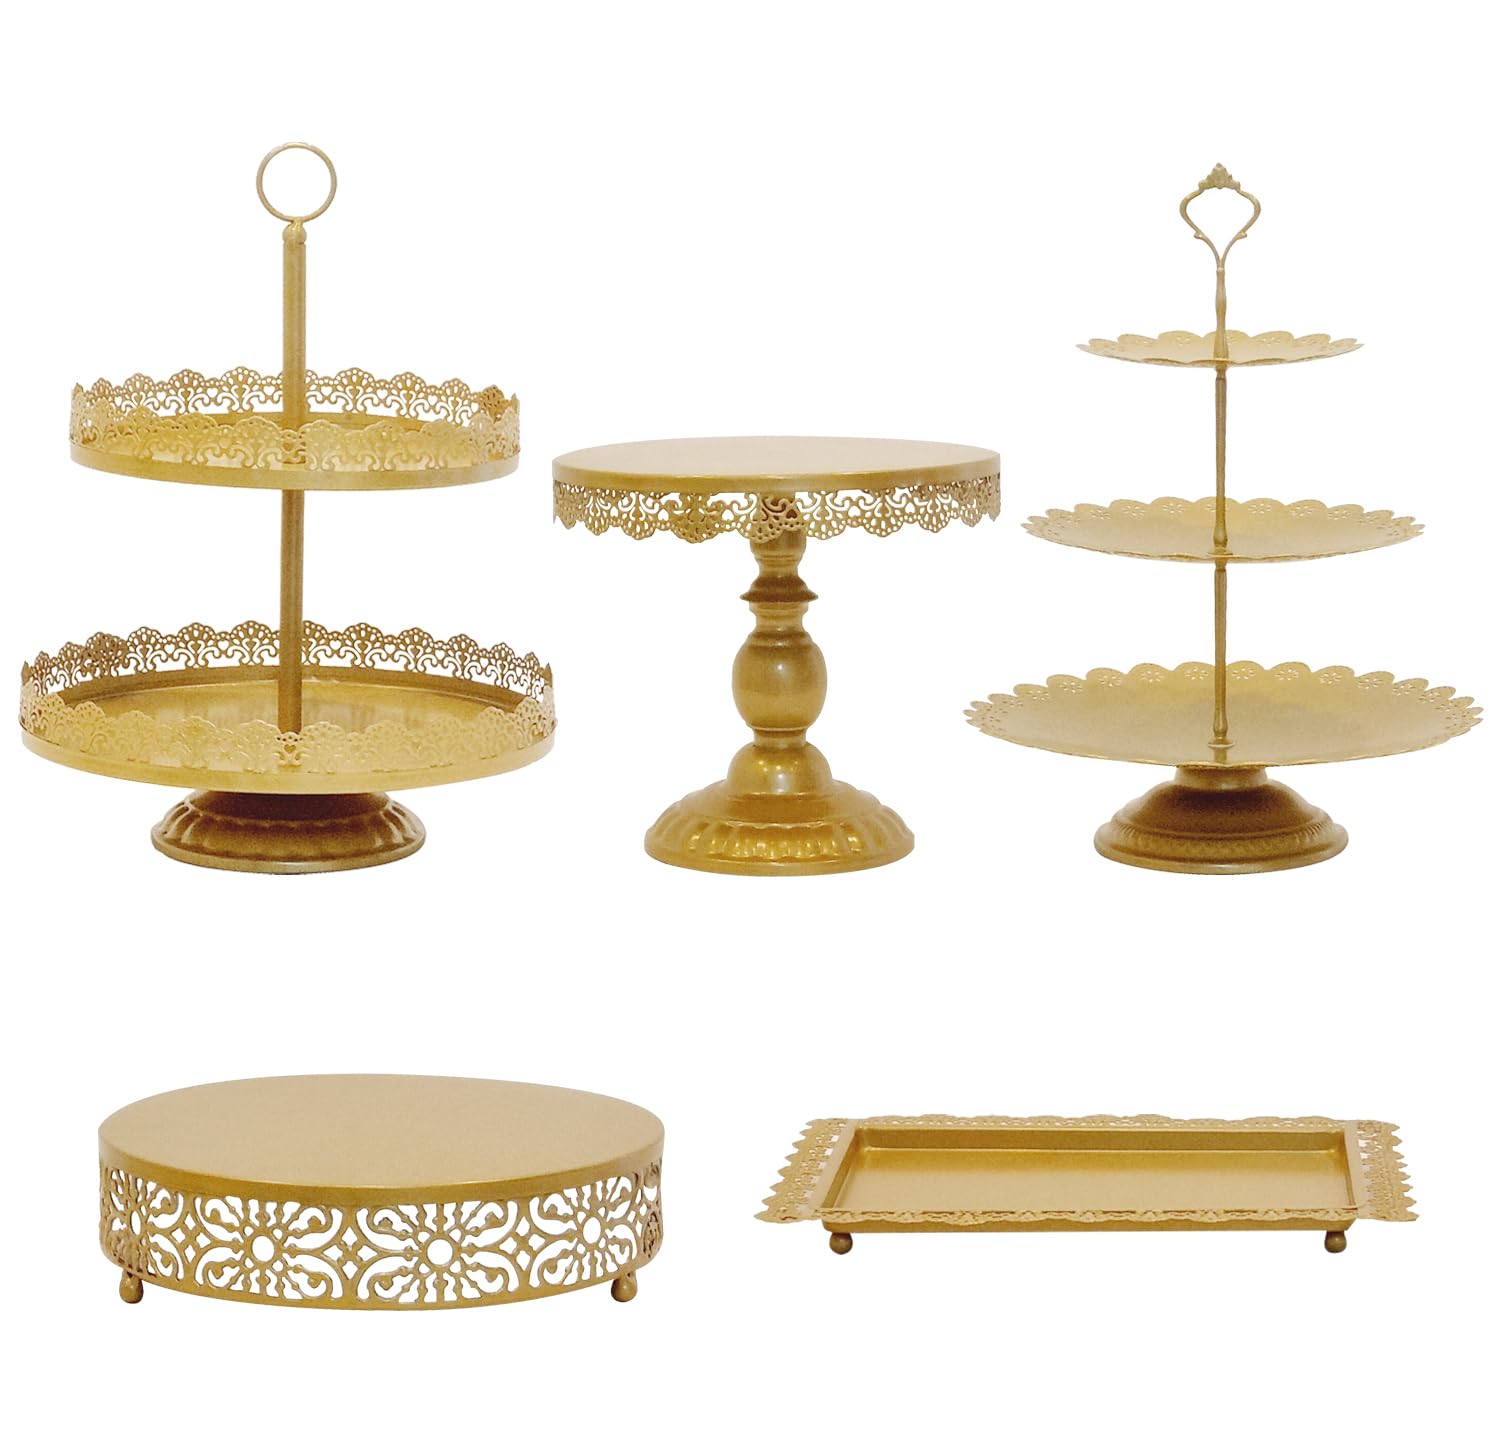 Tiered Cake Stand 5 Pc. Set with 3-Tier, 2-Tier, and Round Displays, Pedestal Dessert Stands, and Square Serving Tray Platter for Cupcakes, Pies, Cookies, Pastries, and Snacks